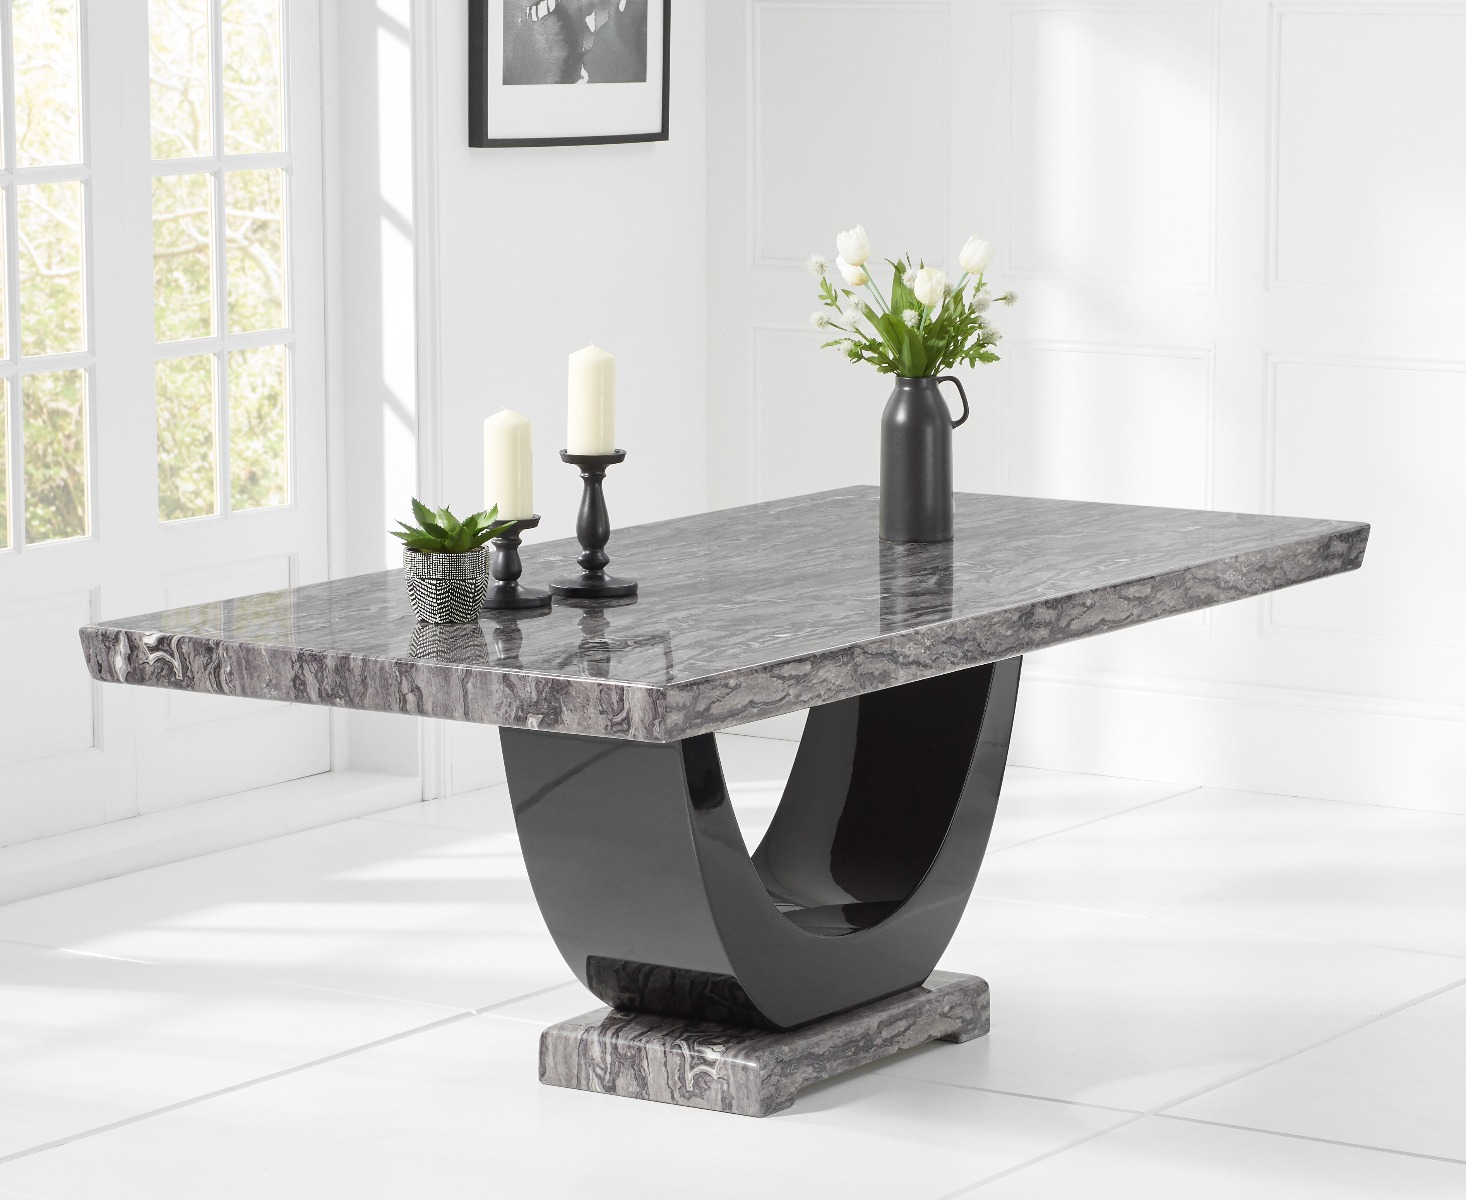 Photo 2 of Raphael 200cm dark grey pedestal marble dining table with 6 grey sophia chairs